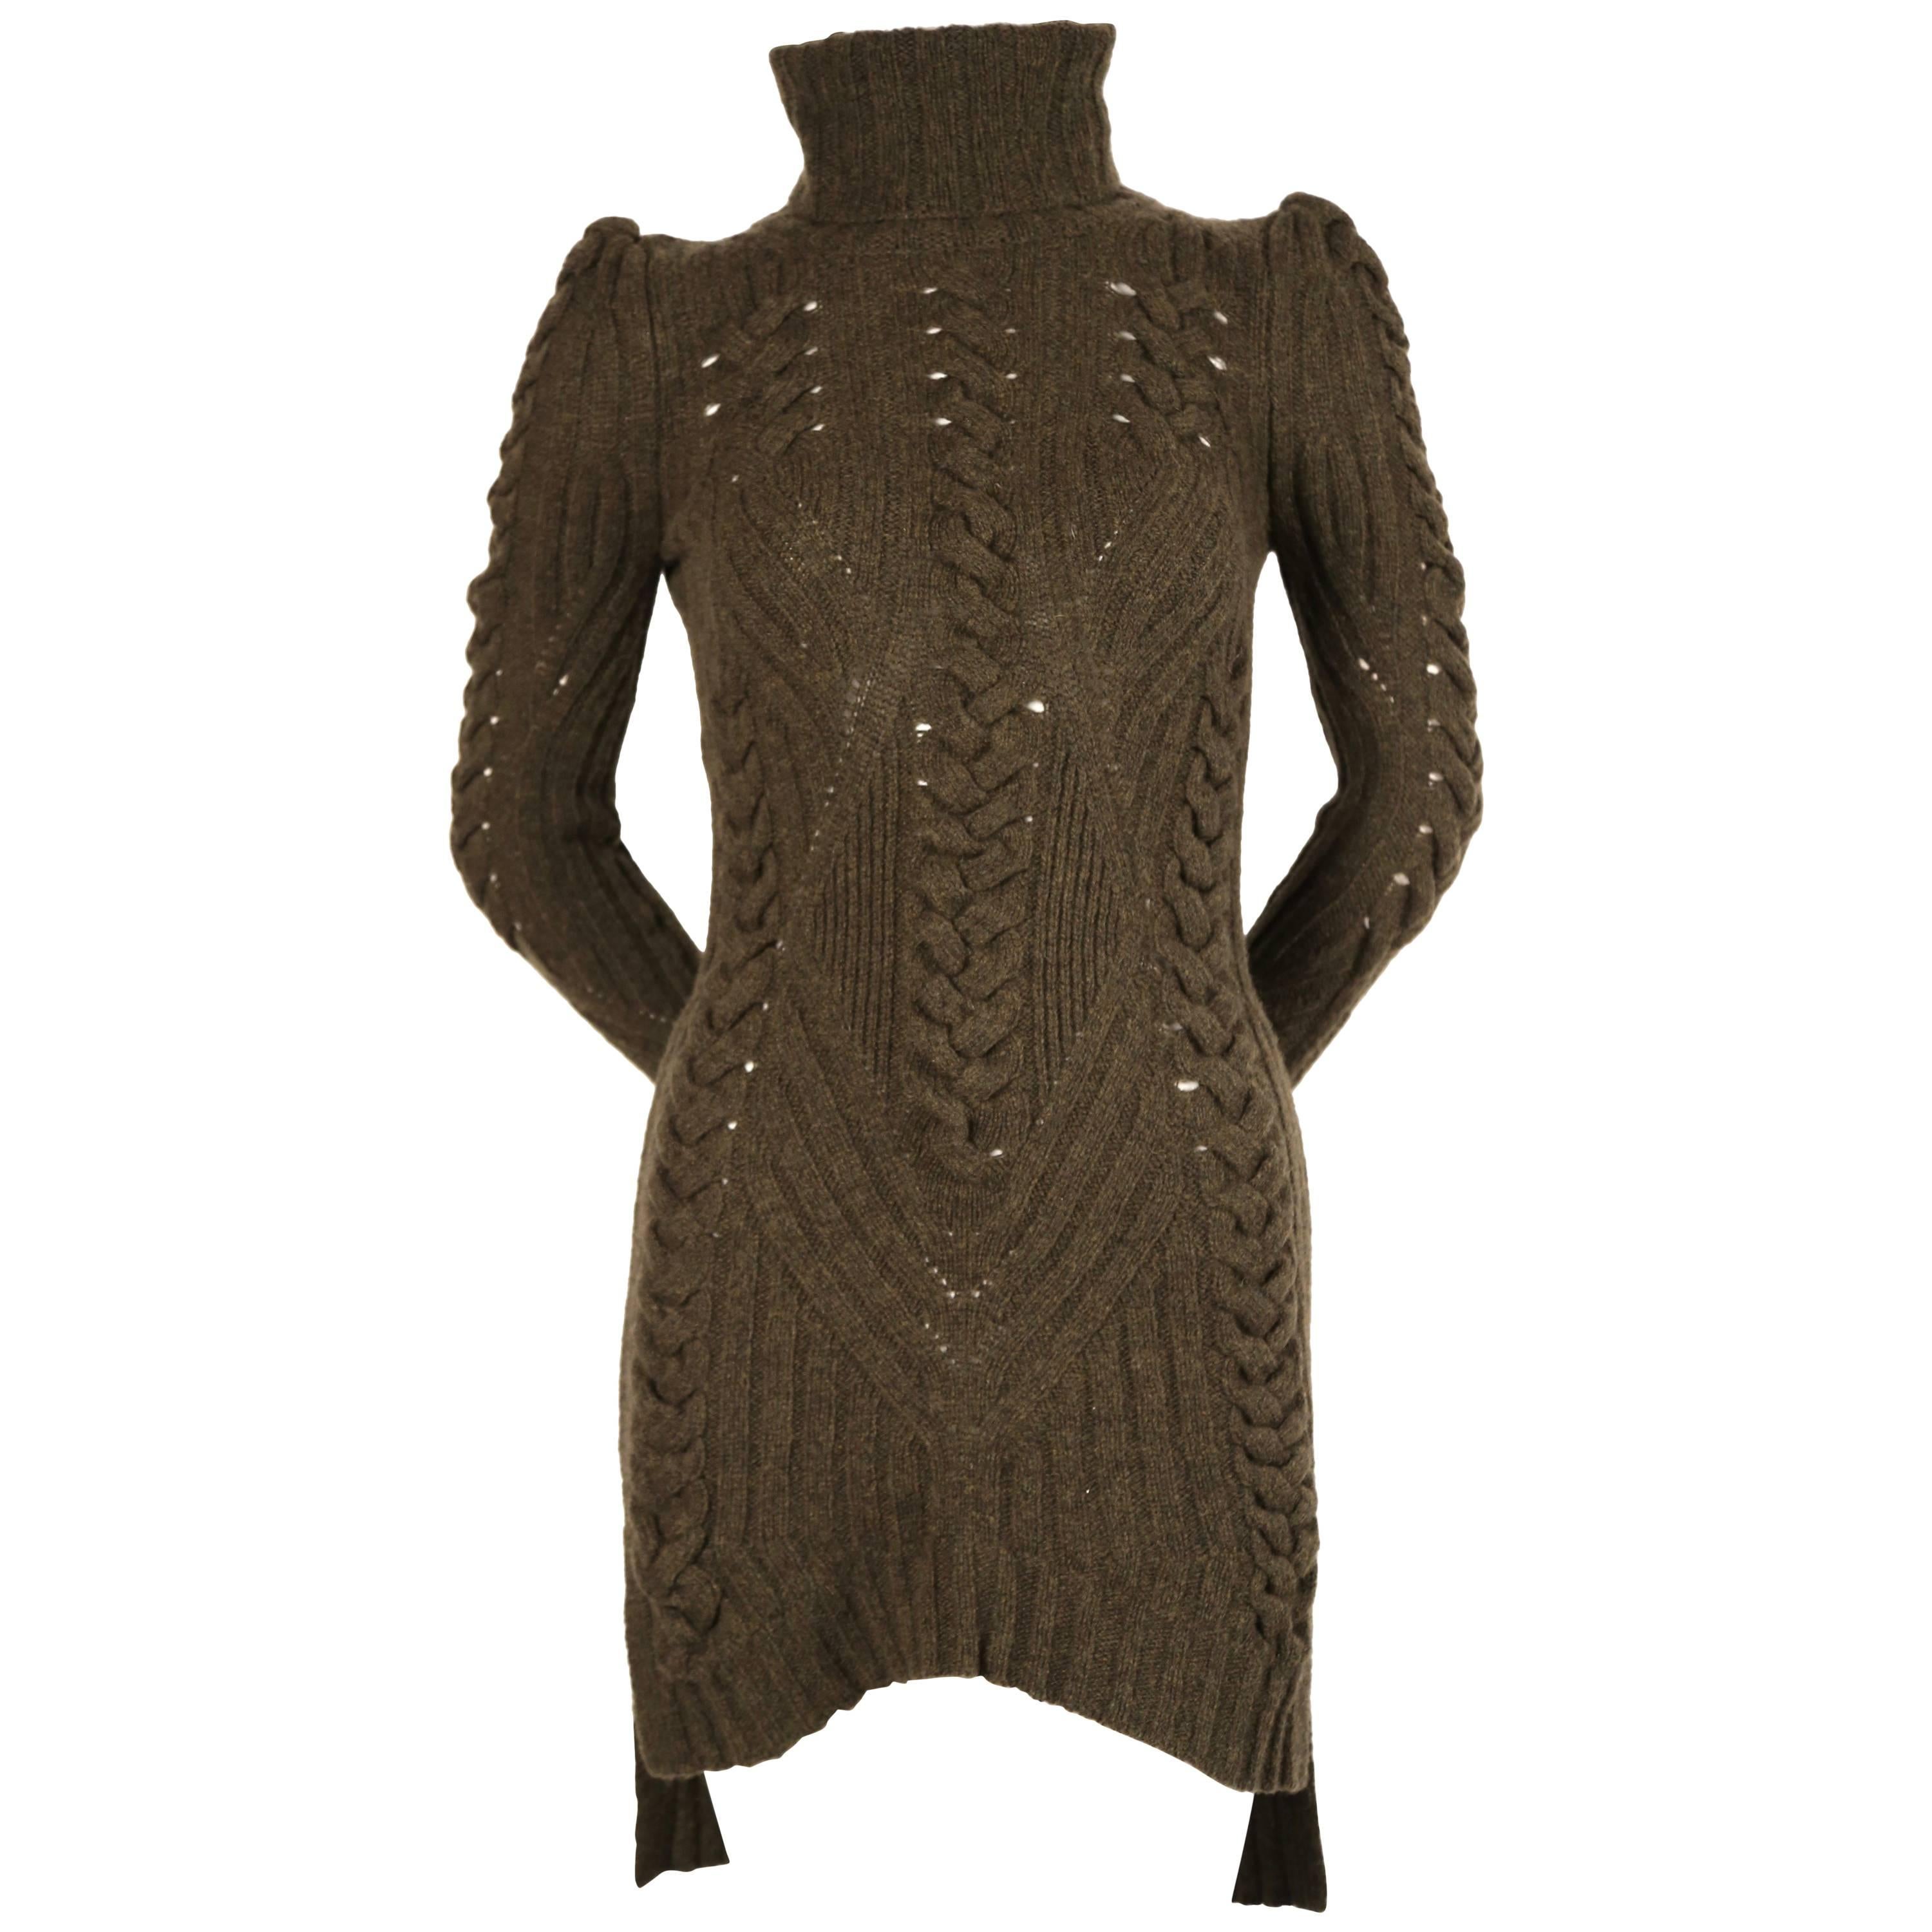 CELINE by PHOEBE PHILO moss green cable knit sweater dress